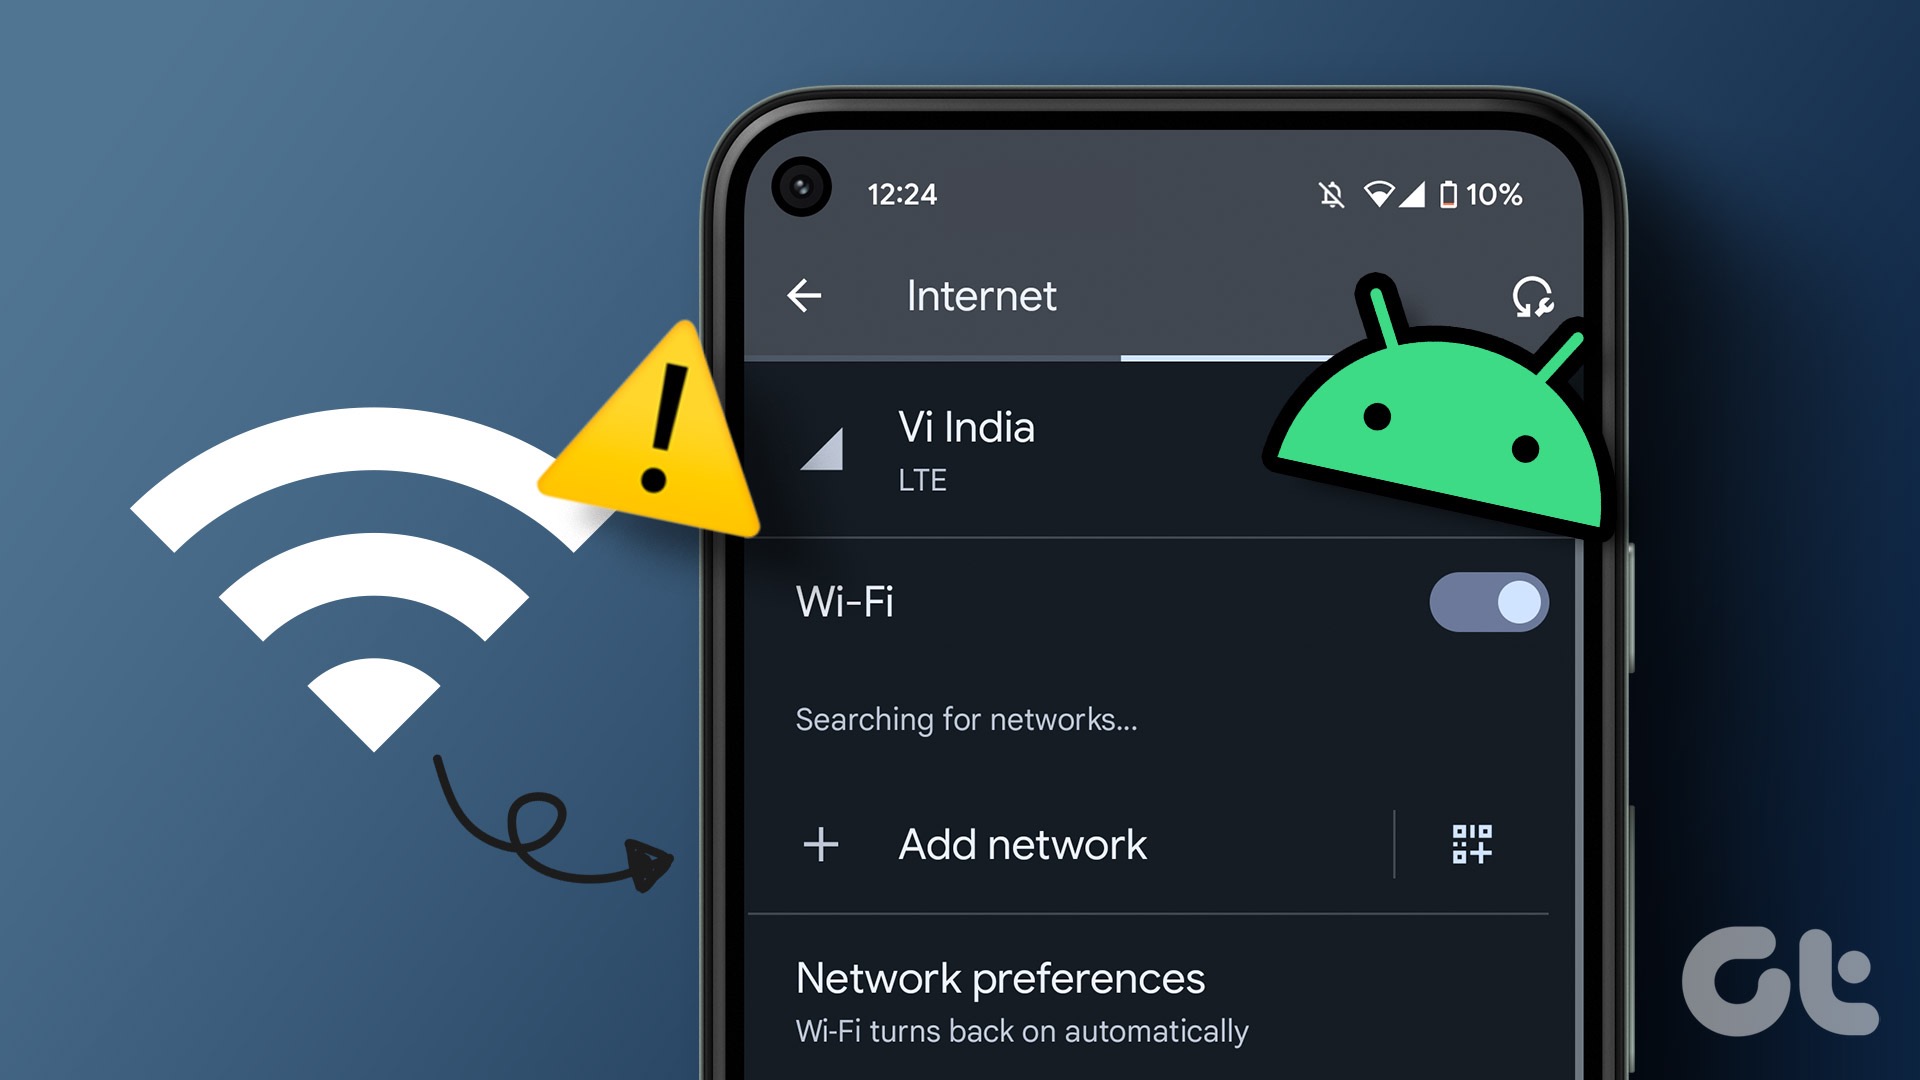 Fix Wi-FI network name not showing on Android